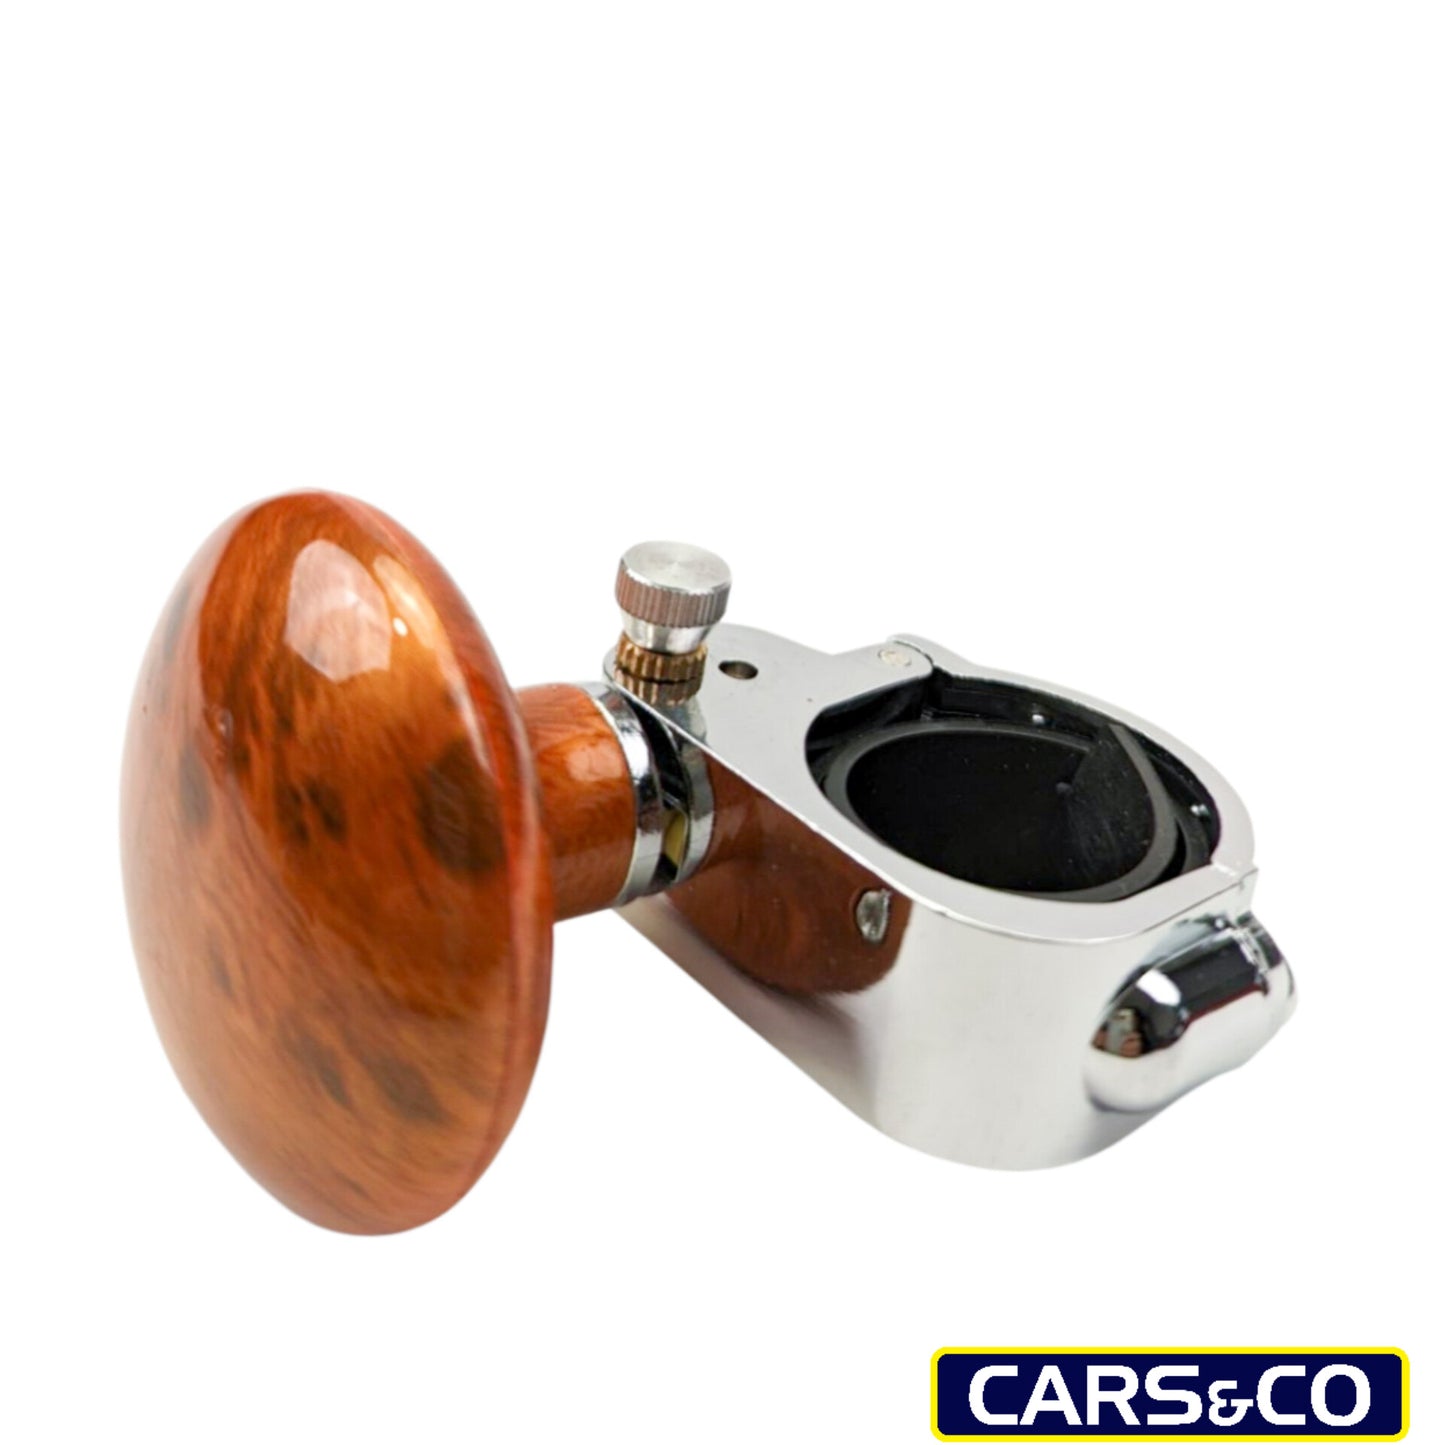 Adjustable steering of automobile booster